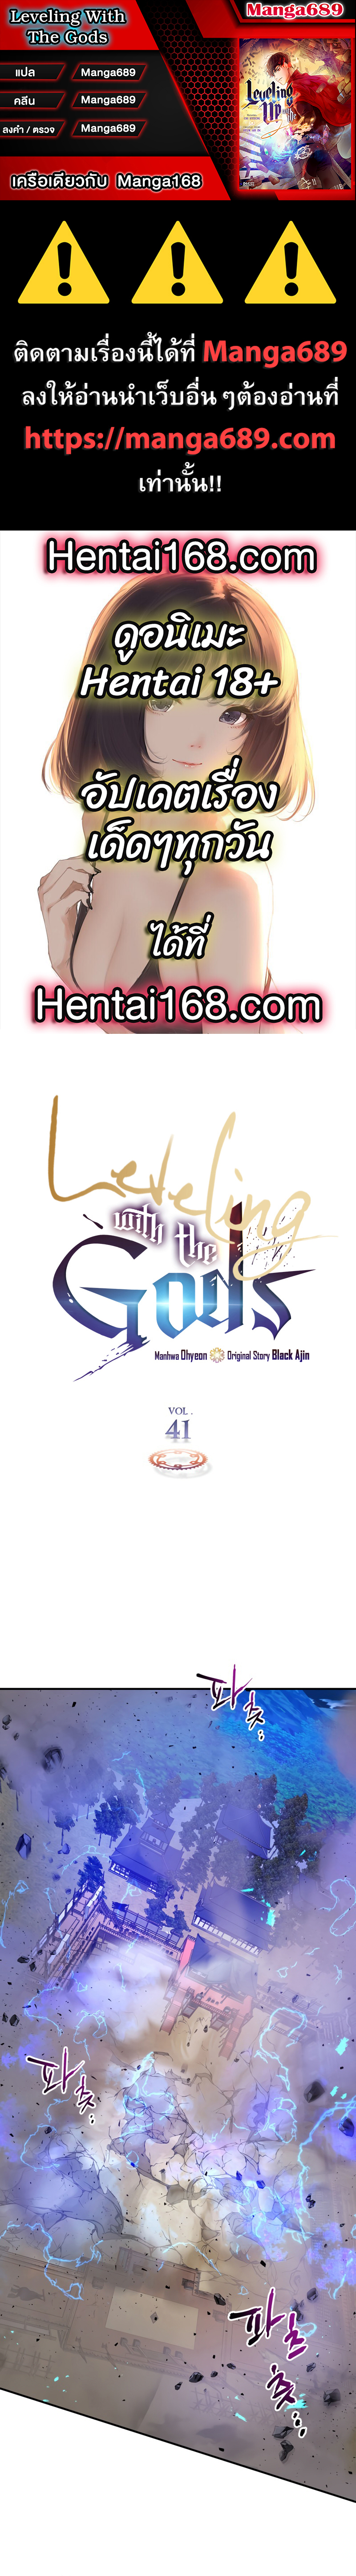 Leveling With The Gods41 (1)